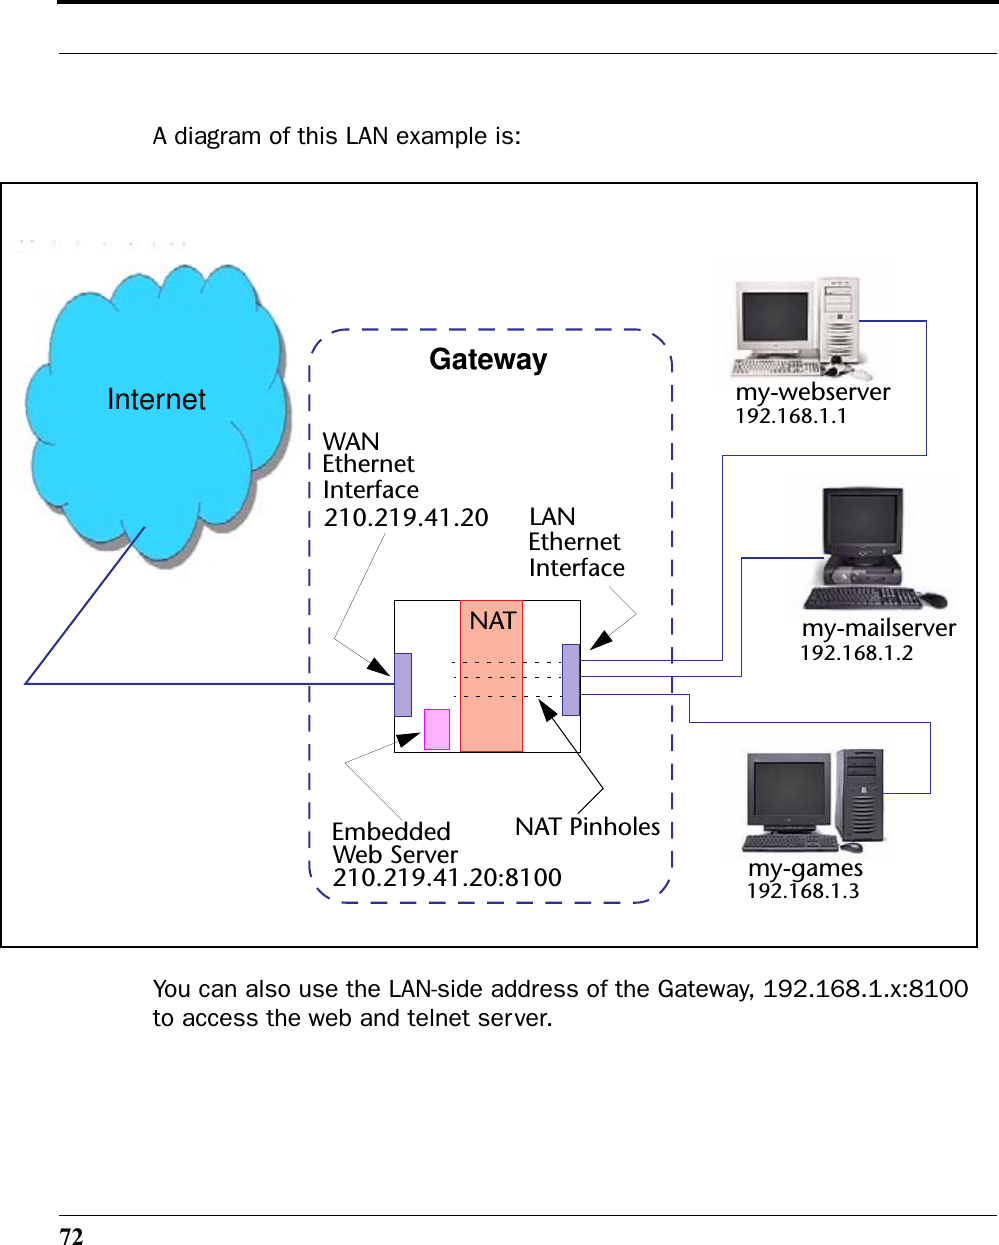 72A diagram of this LAN example is:You can also use the LAN-side address of the Gateway, 192.168.1.x:8100 to access the web and telnet server.WANLANEthernet Interface192.168.1.1192.168.1.2192.168.1.3my-webservermy-mailservermy-gamesGatewayNATNAT PinholesEmbeddedWeb Server210.219.41.20210.219.41.20:8100Ethernet InterfaceInternet